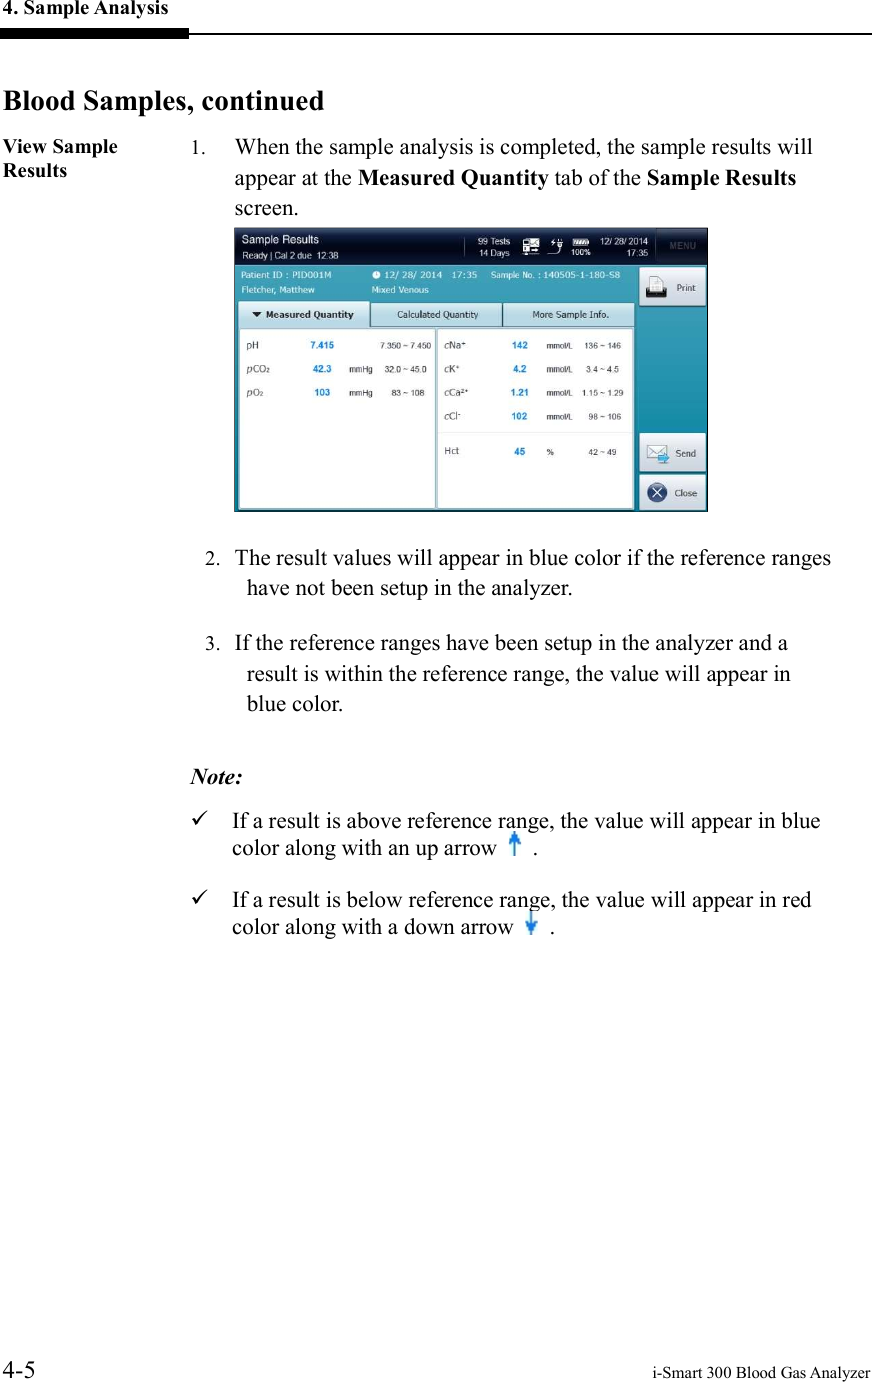 4. Sample Analysis     4-5    i-Smart 300 Blood Gas Analyzer  Blood Samples, continued View Sample Results 1. When the sample analysis is completed, the sample results will appear at the Measured Quantity tab of the Sample Results screen.  2. The result values will appear in blue color if the reference ranges have not been setup in the analyzer. 3. If the reference ranges have been setup in the analyzer and a result is within the reference range, the value will appear in blue color.  Note:  If a result is above reference range, the value will appear in blue color along with an up arrow    .  If a result is below reference range, the value will appear in red color along with a down arrow    .  